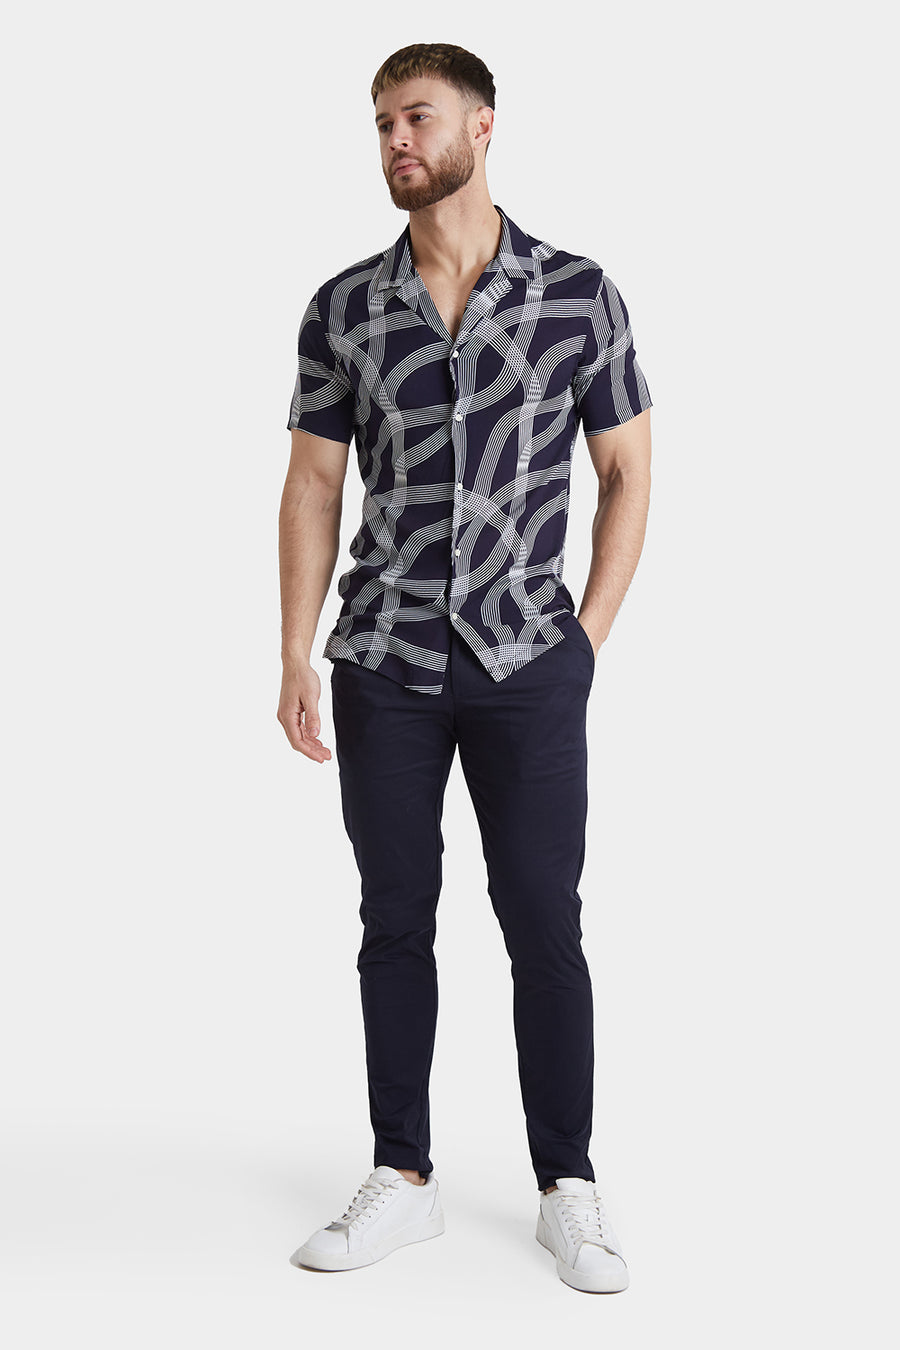 Printed Shirt in Navy Curved Stripe - TAILORED ATHLETE - USA